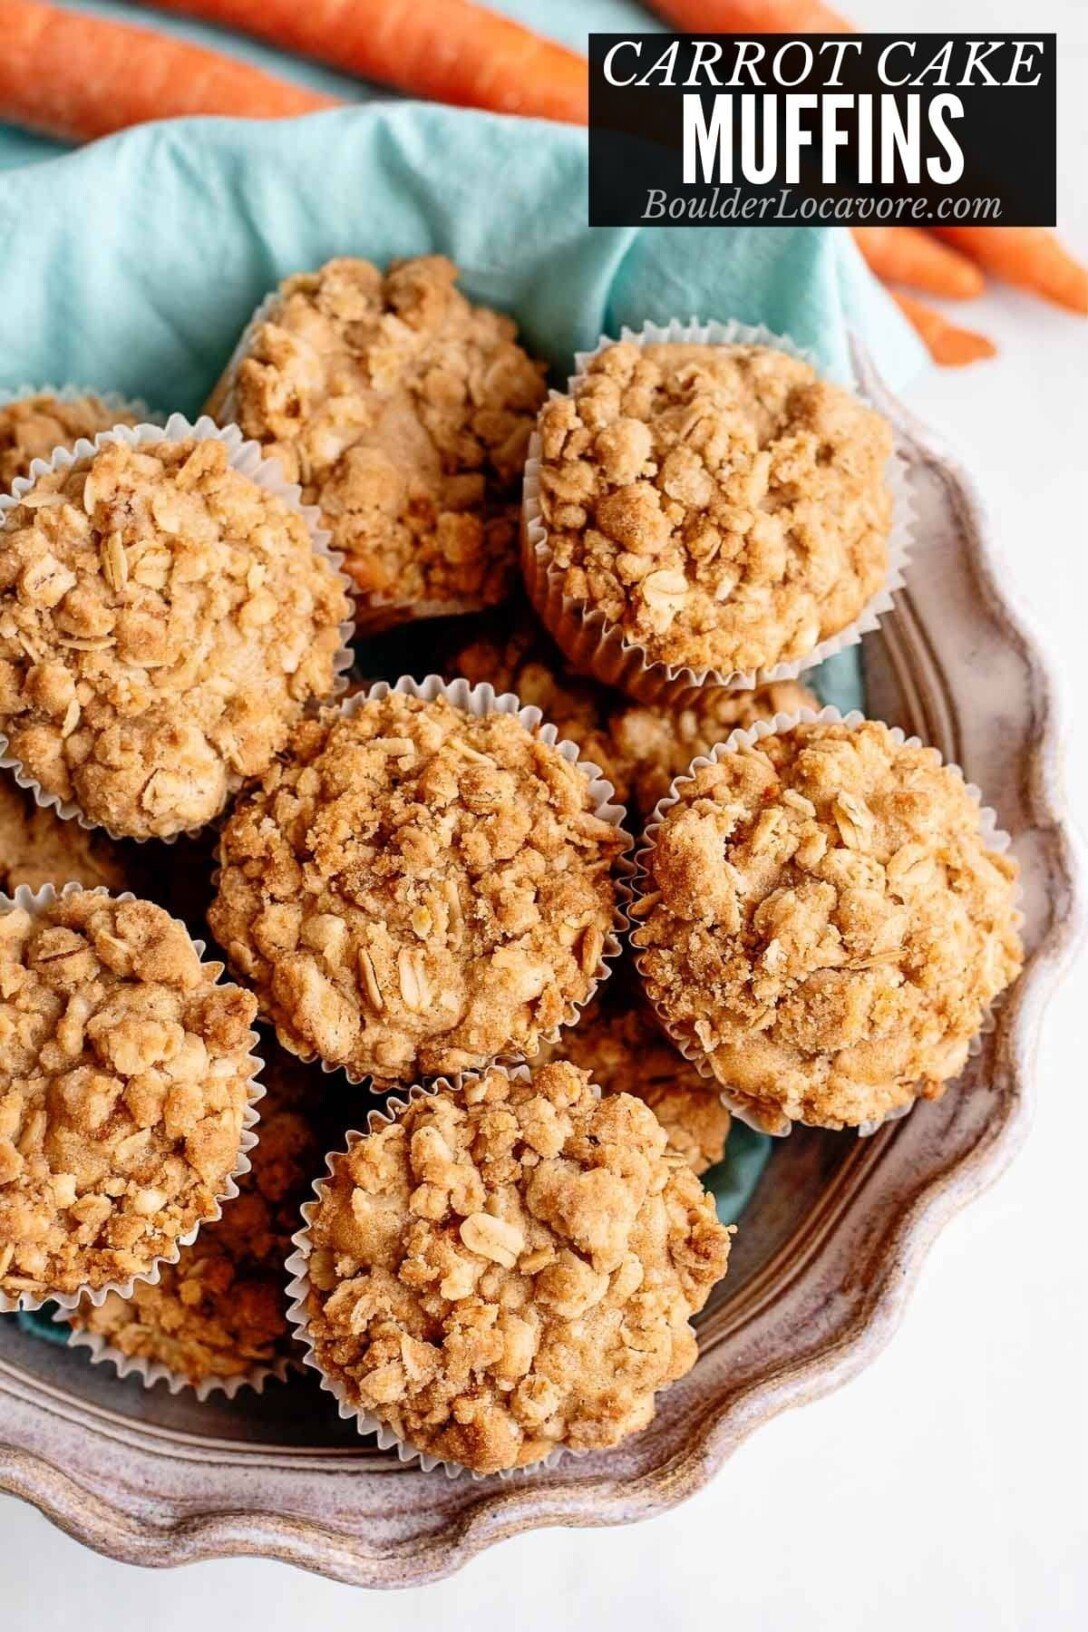 CARROT CAKE MUFFINS TITLE